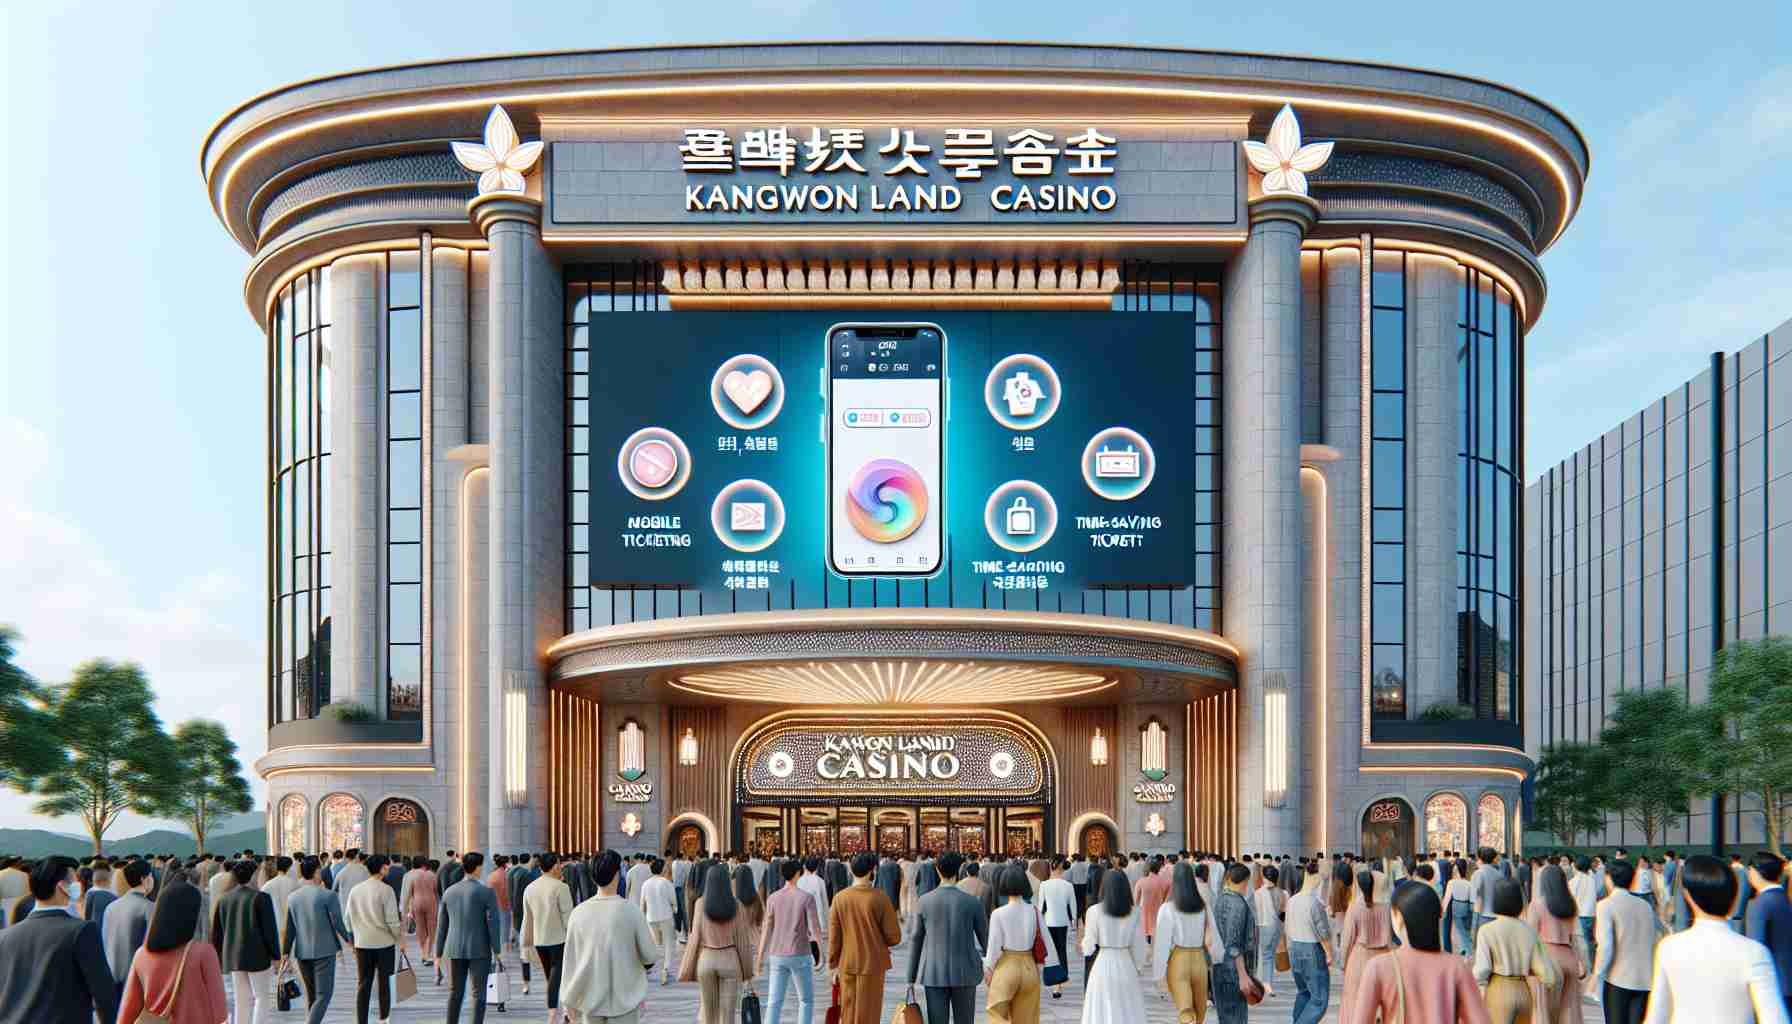 Kangwon Land Casino Introduces Time-saving Mobile Ticketing System